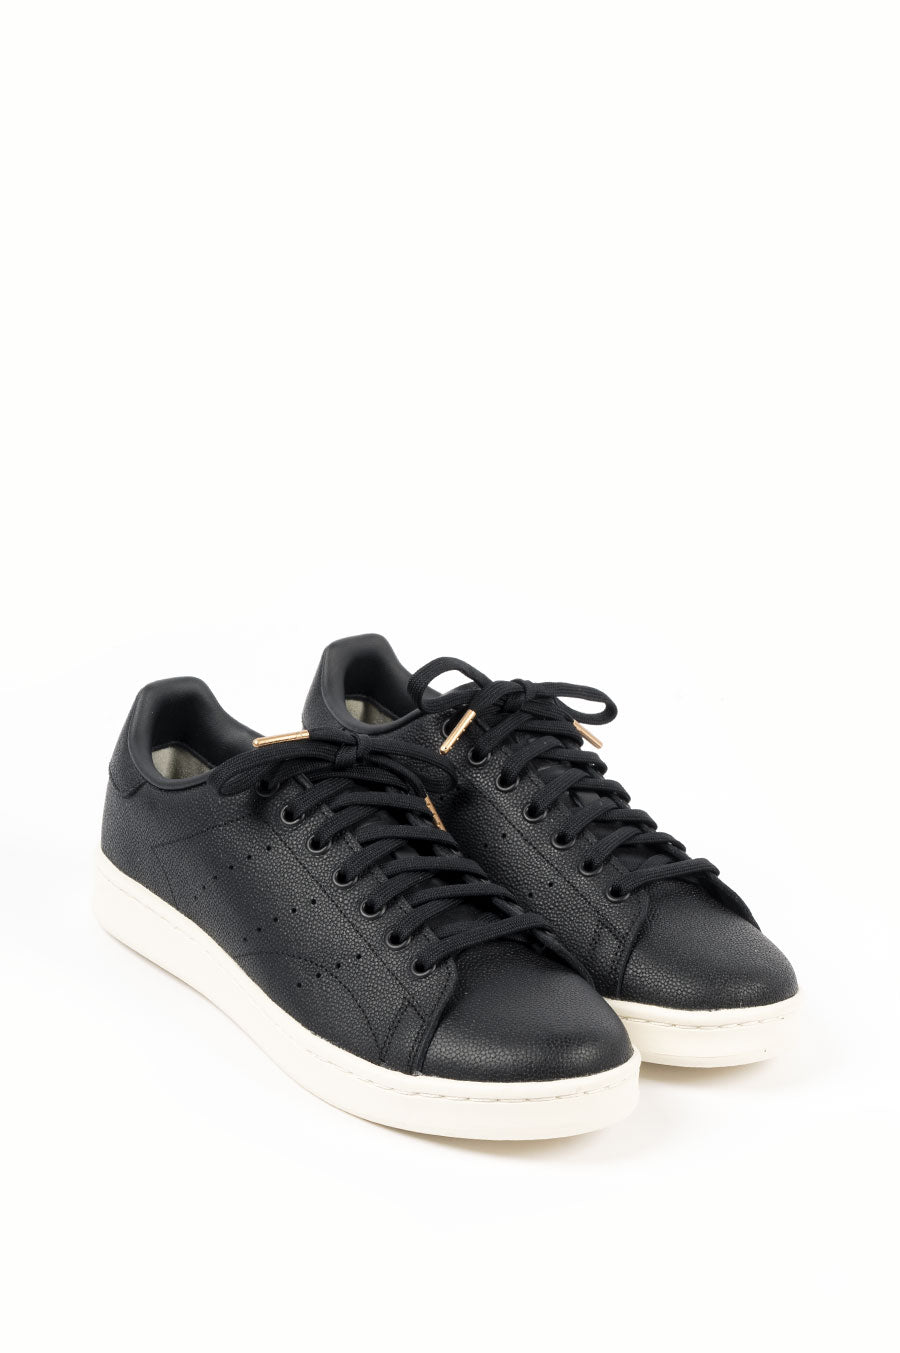 ADIDAS STAN SMITH BLACK PEBBLED LEATHER – BLENDS